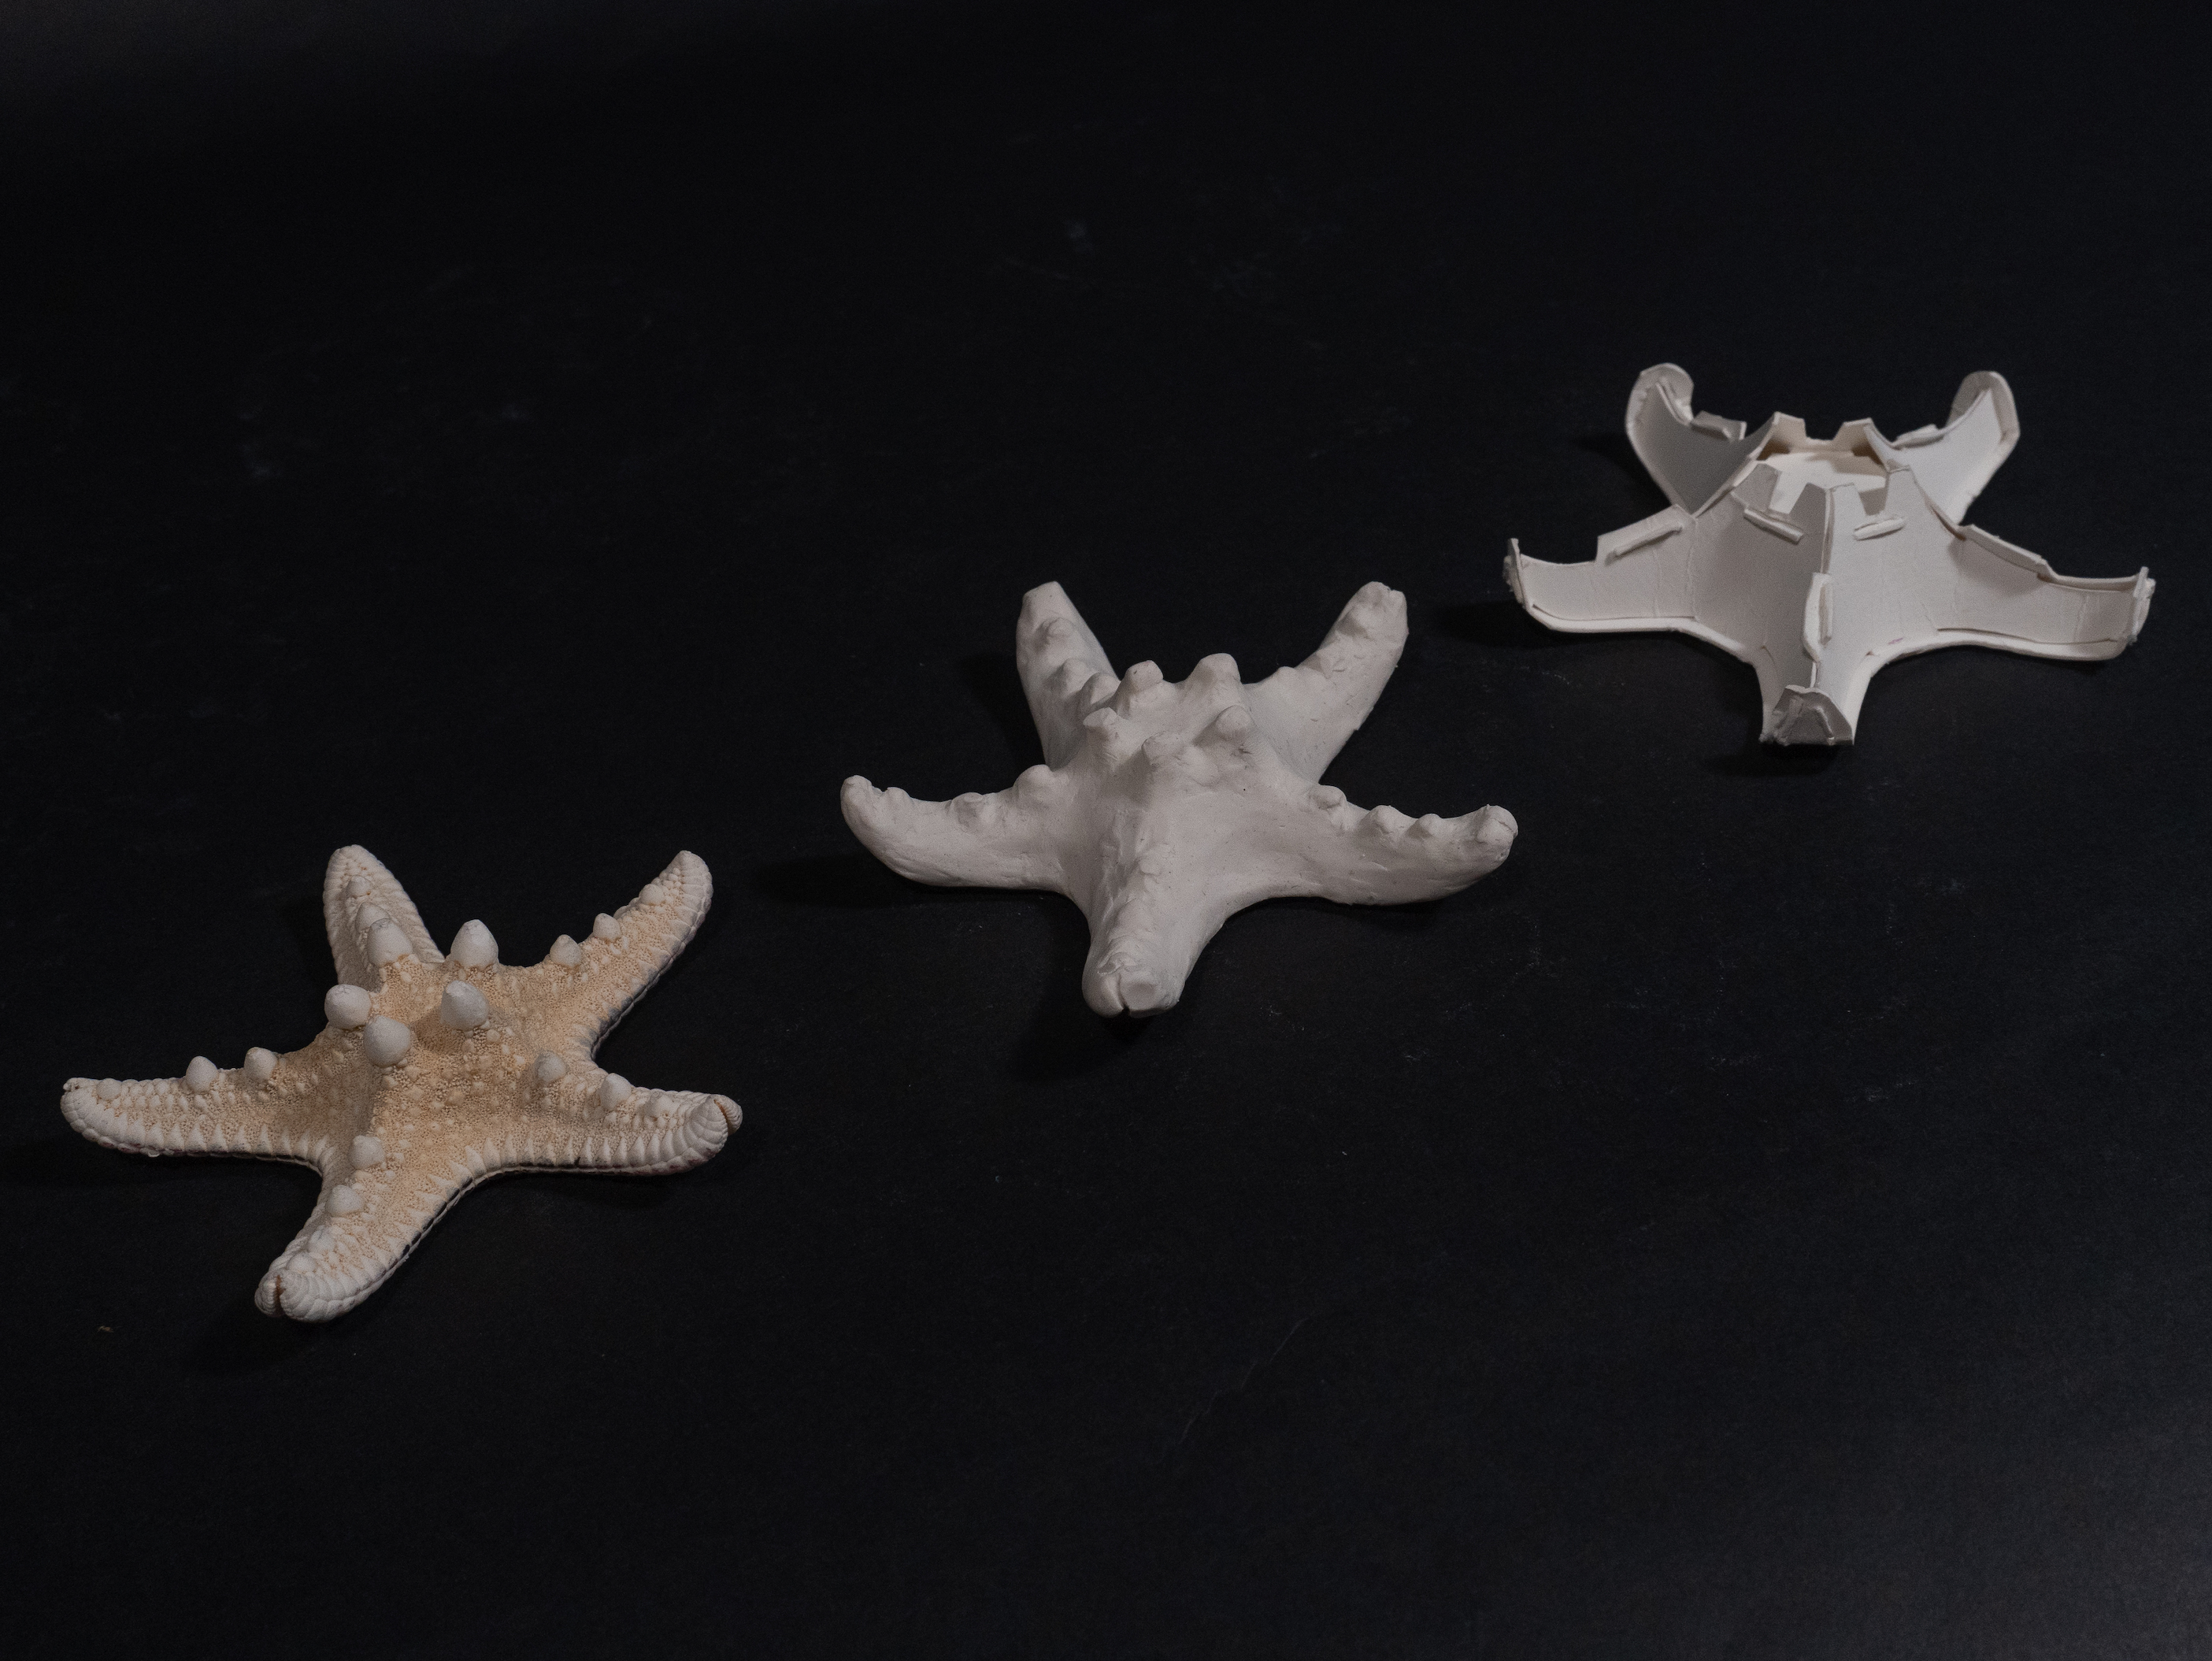 A starfish with one clay model and one Paper model